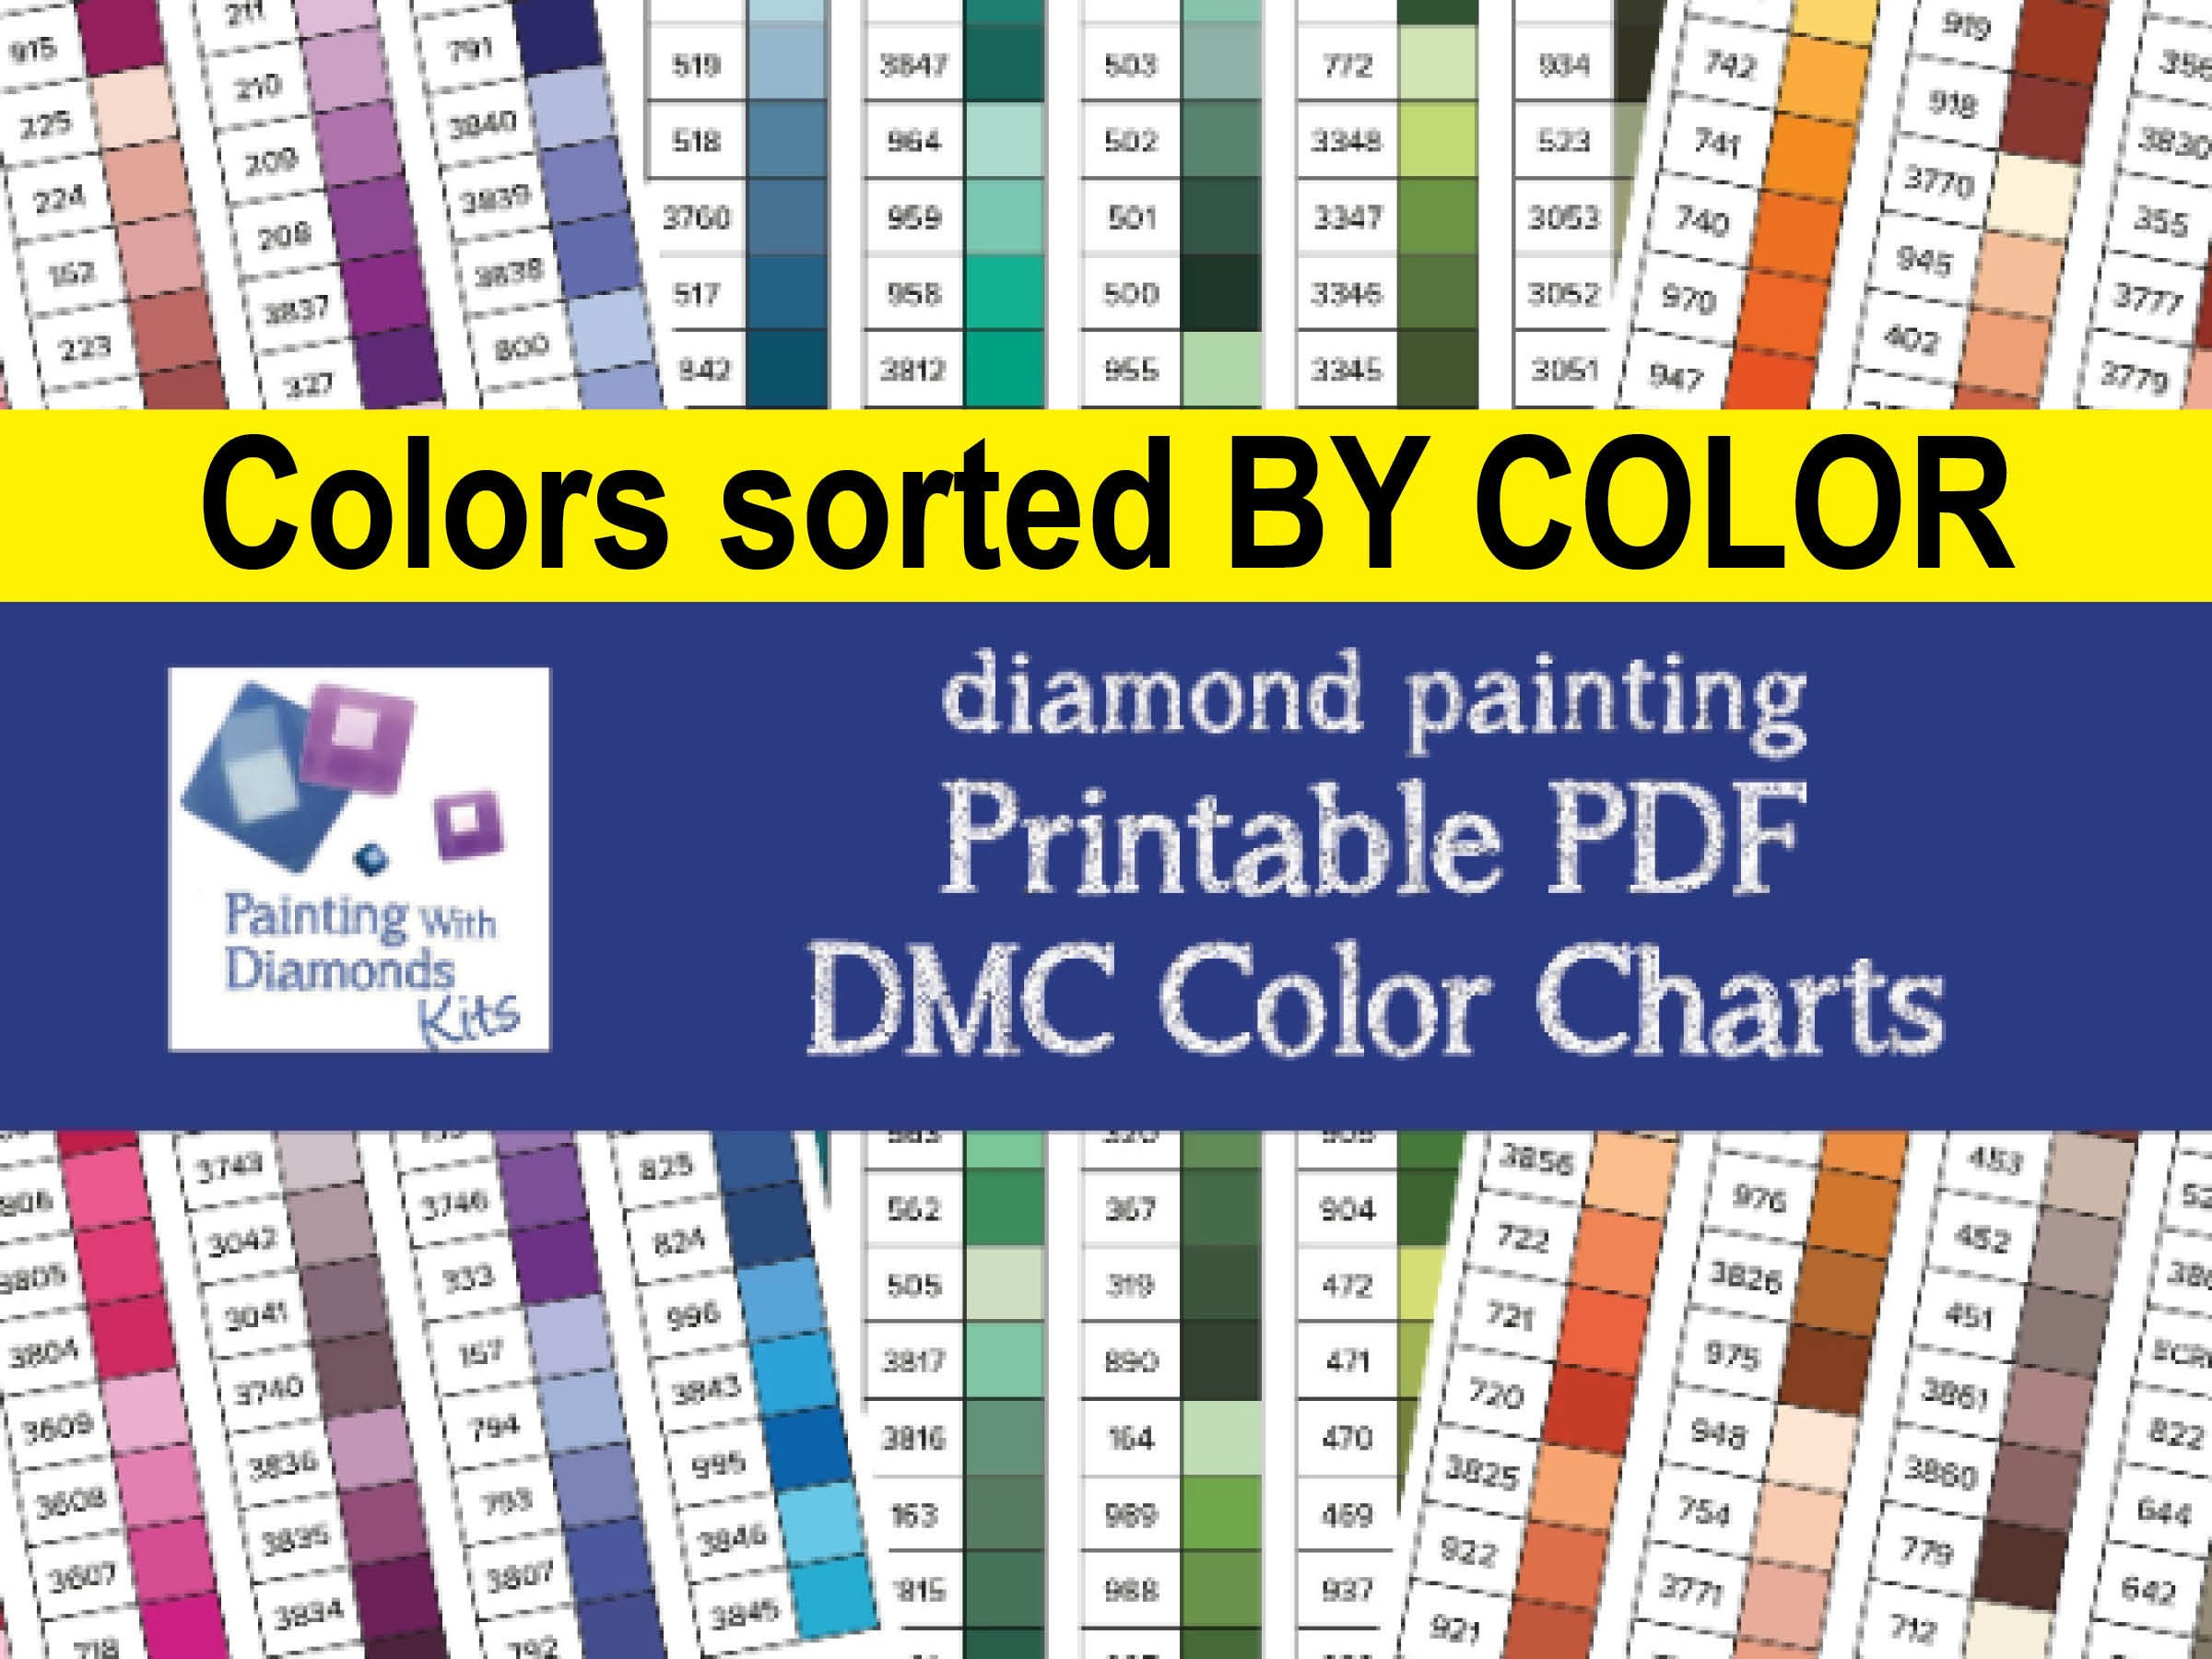 dmc-color-charts-with-crystal-diamond-drills-for-diamond-painting-drill